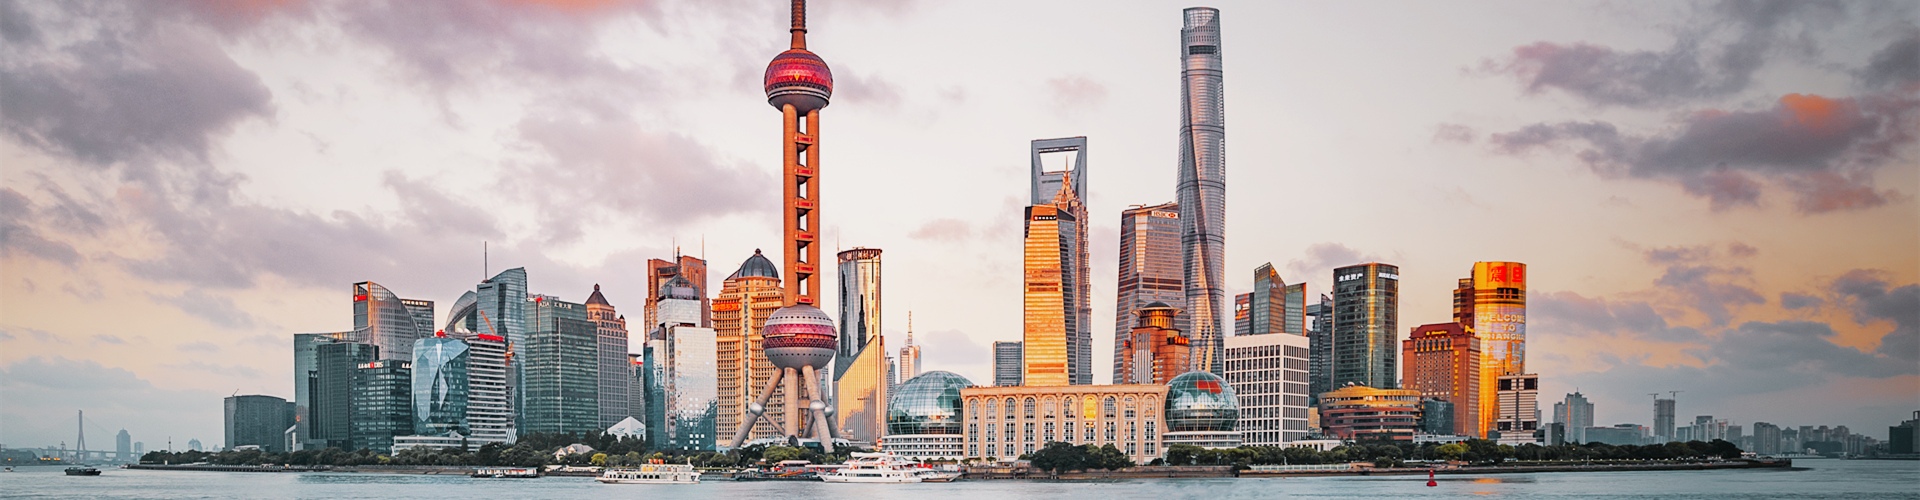 1 Day in Shanghai, a Detailed Travel Guide for You